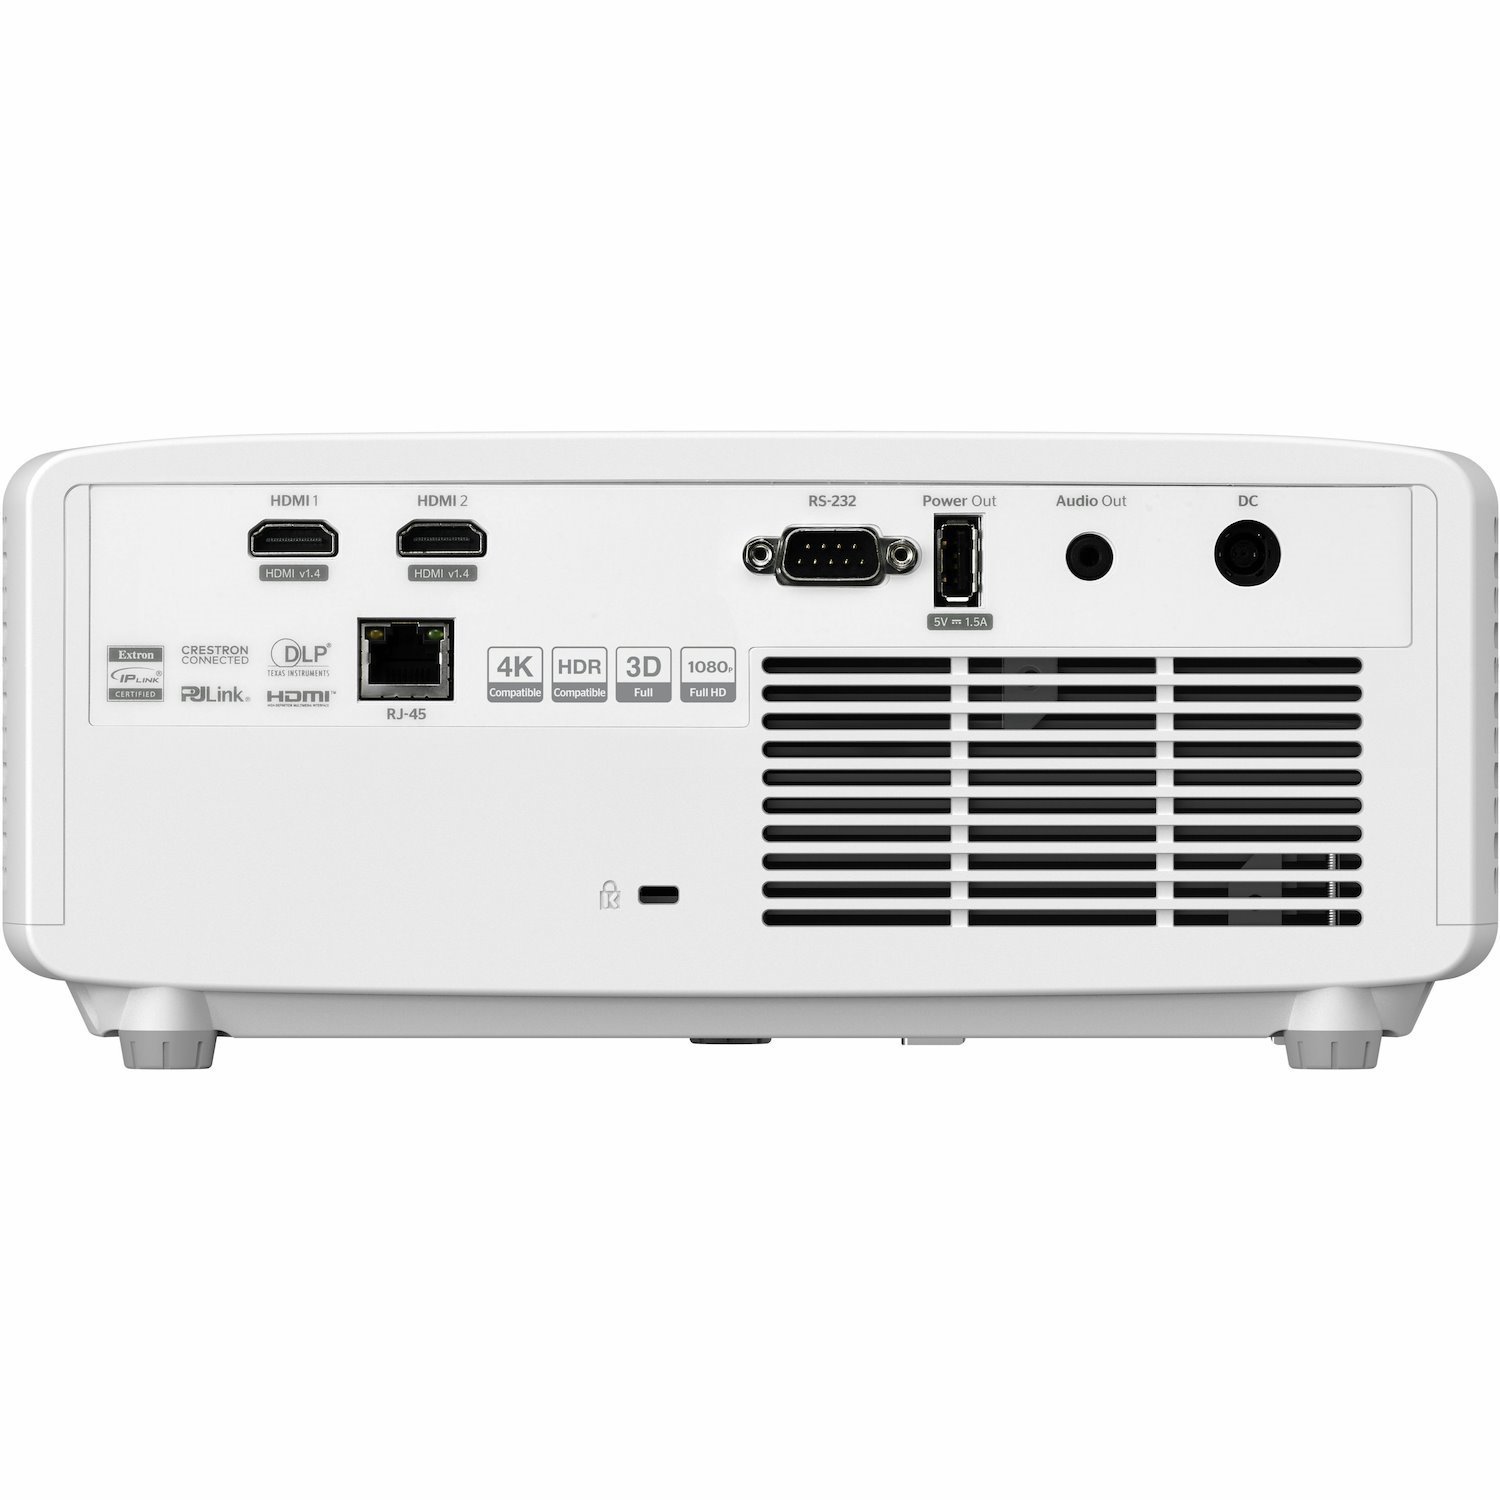 Optoma ZH450ST 3D Short Throw DLP Projector - 16:9 - Wall Mountable, Portable - White